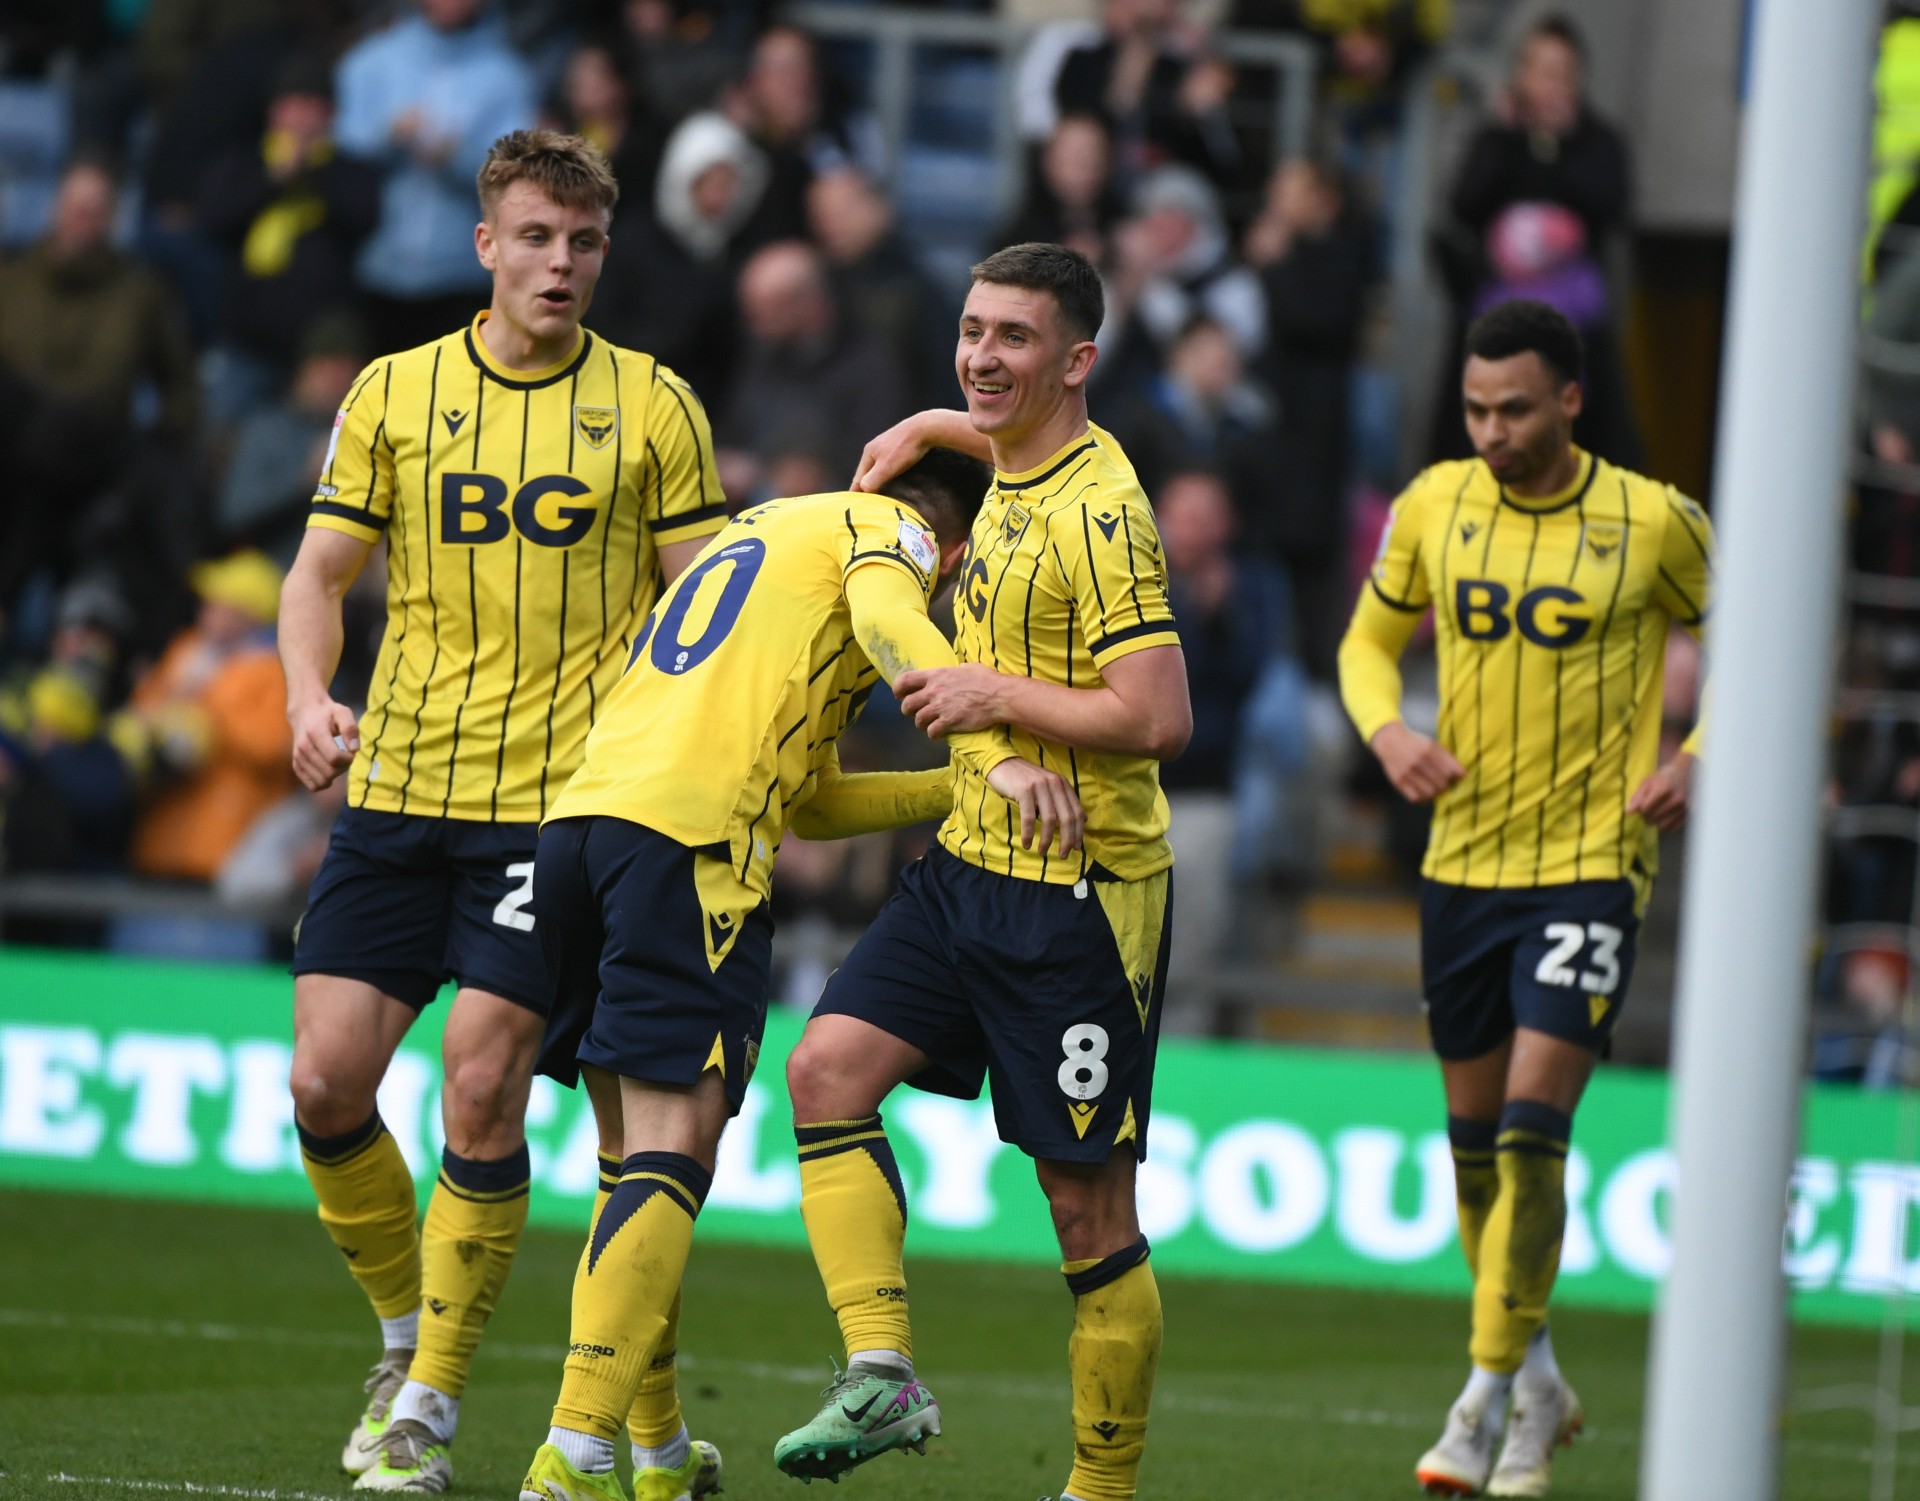 Sky Sports to show Oxford United at home to Stevenage in League One